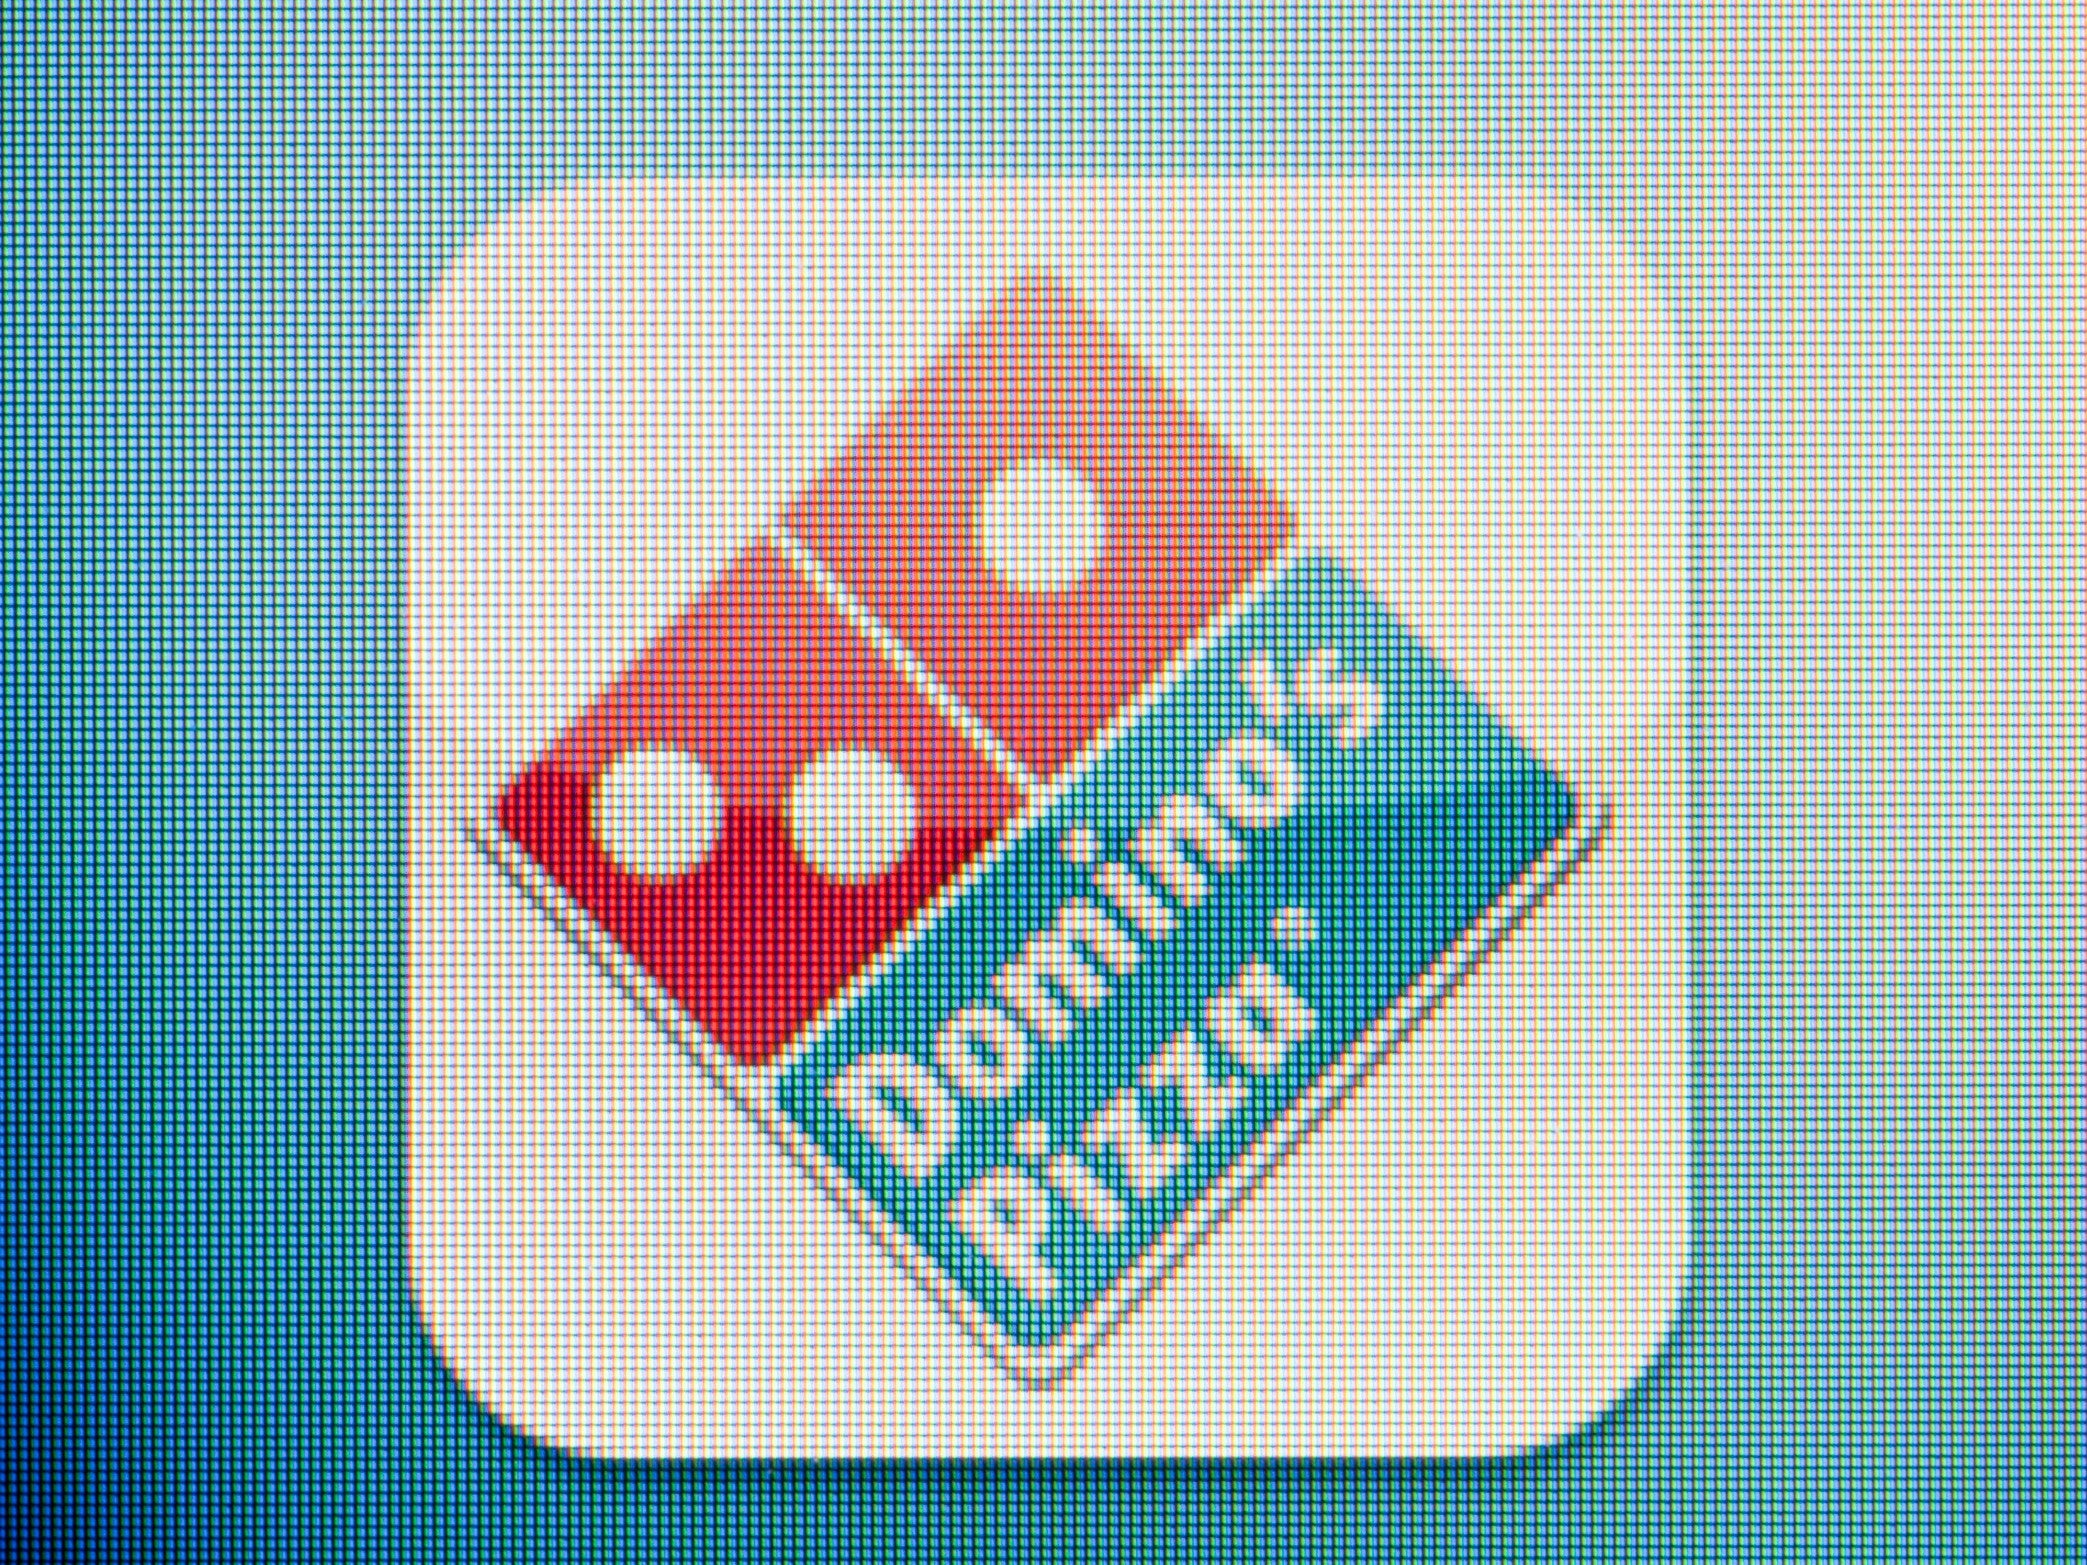 A Domino’s pizza order from February 2011 cost 19 bitcoins